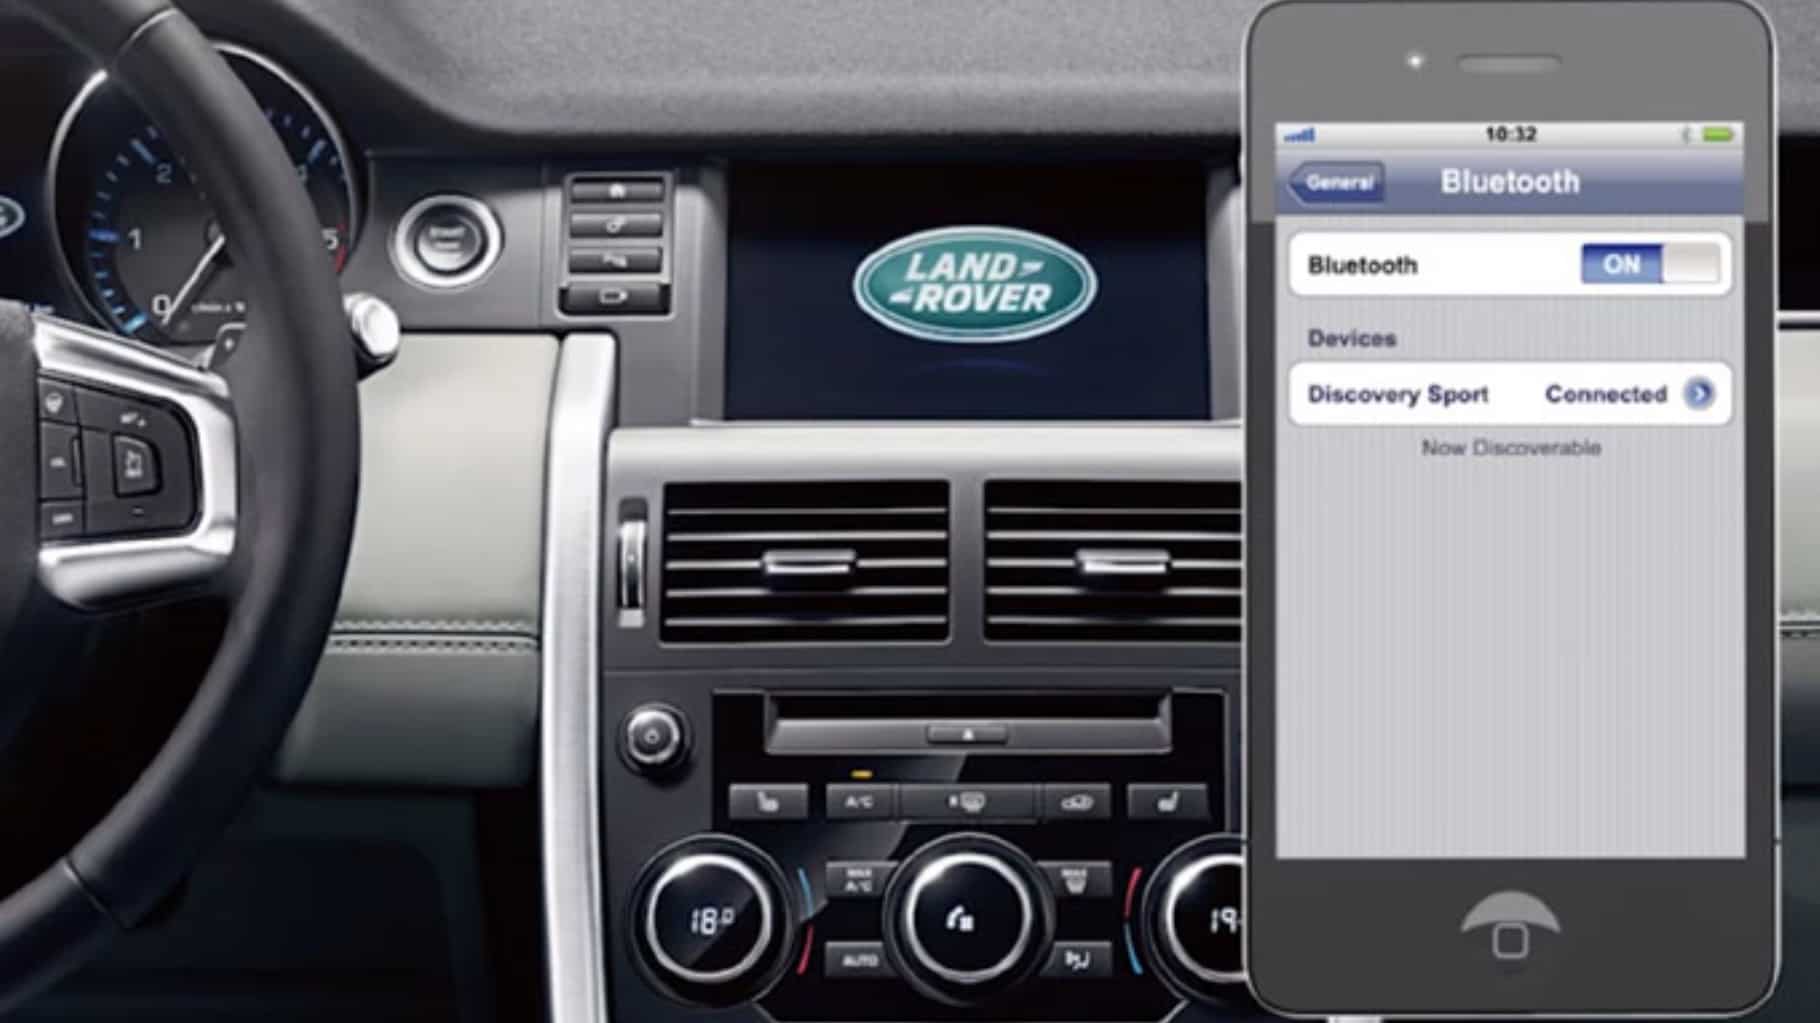 Discovery Sport InControl Touch Plus: Bluetooth Pairing